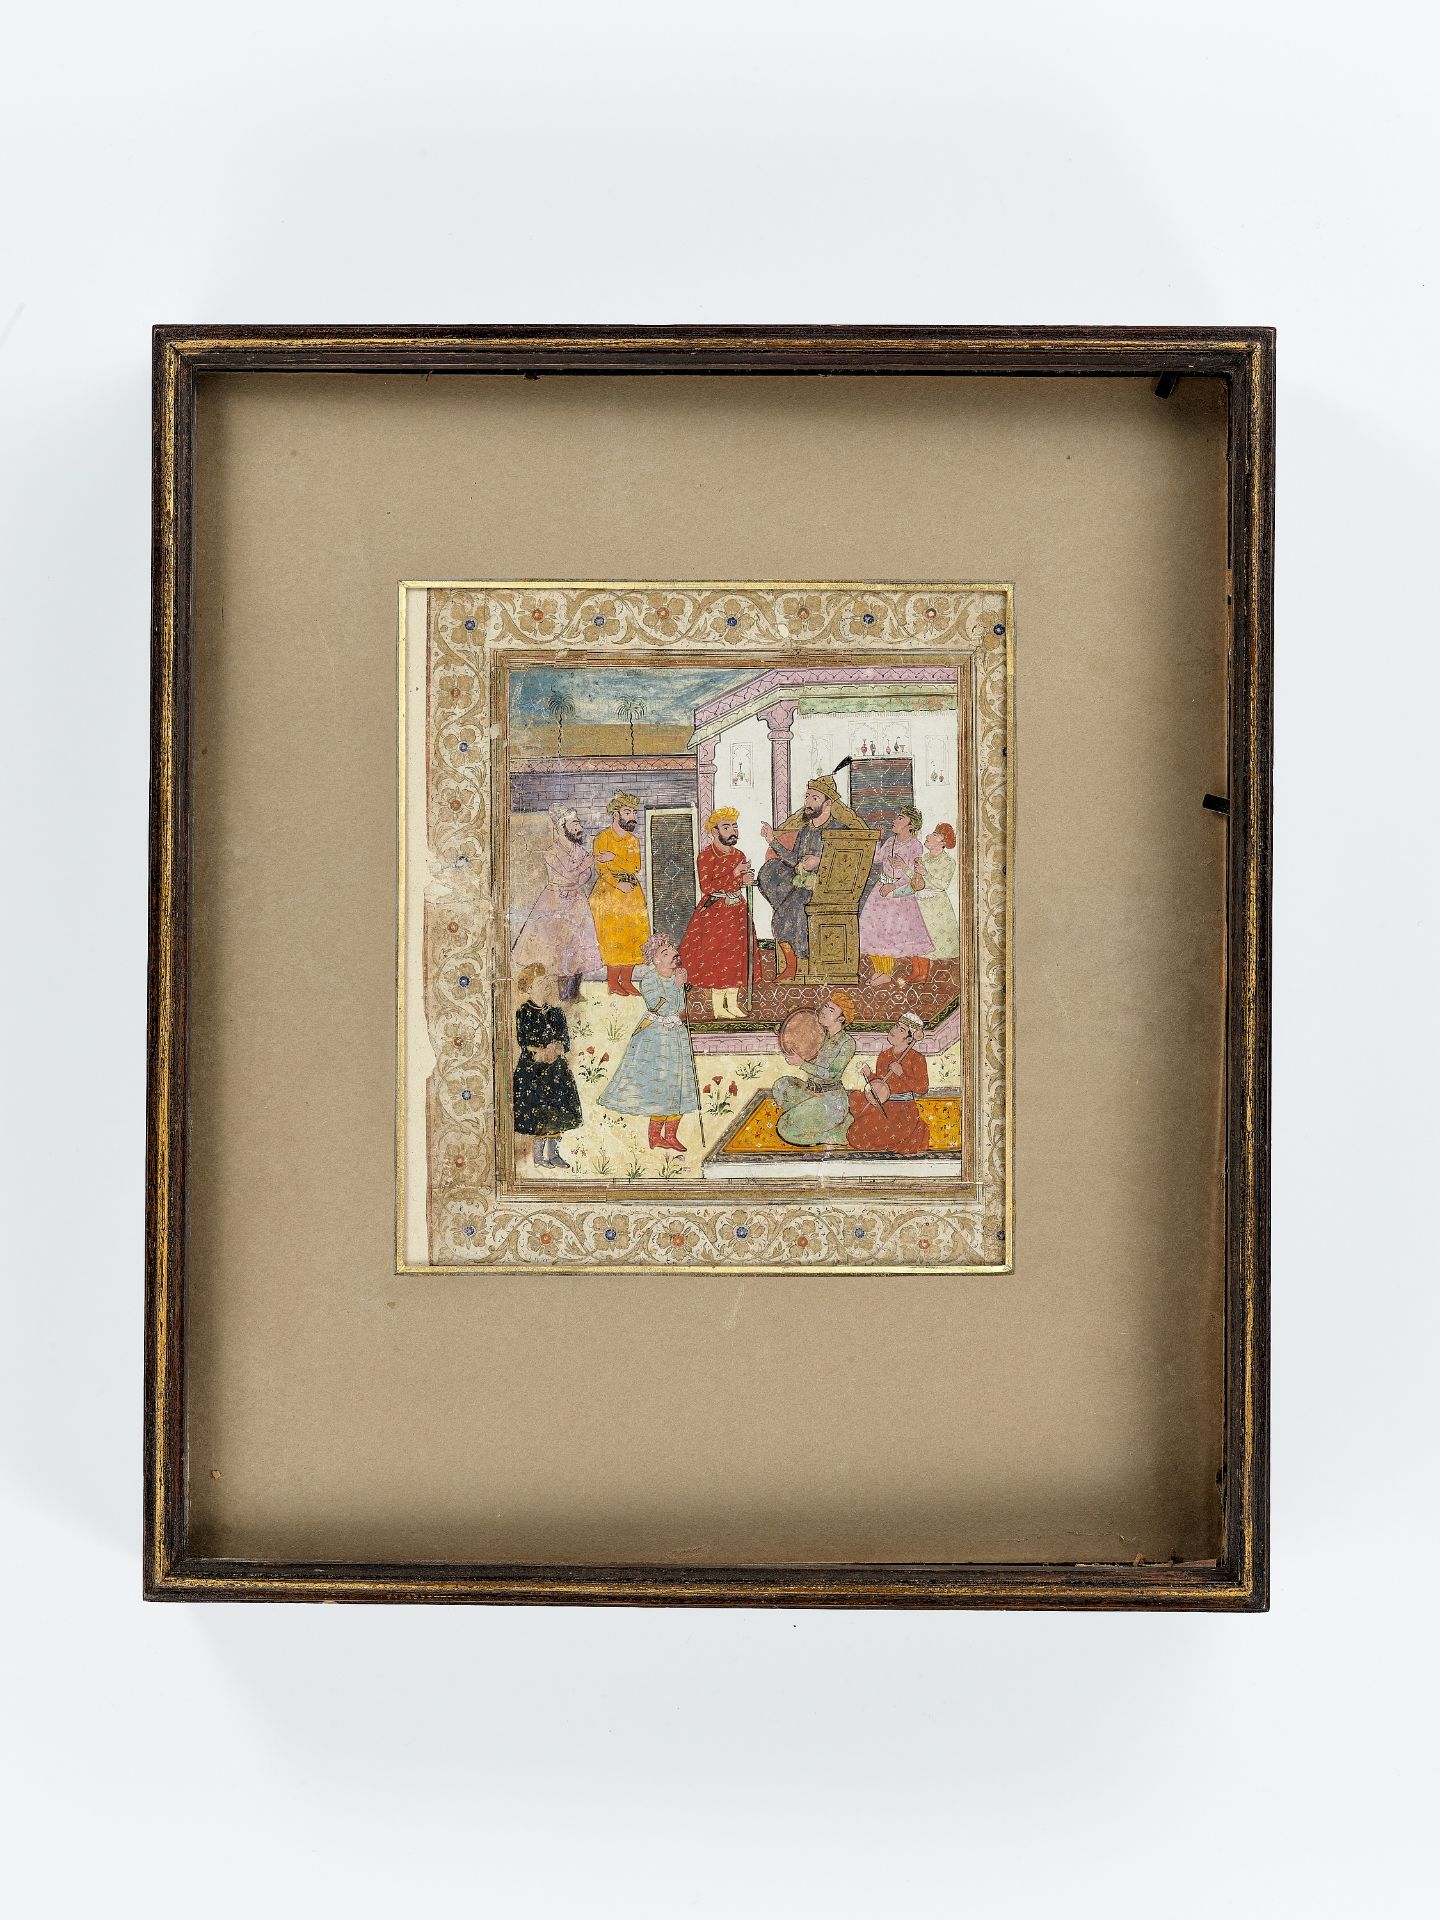 AN EARLY INDIAN MINIATURE PAINTING OF A COURTIER PETITIONING A RULER - Image 9 of 10